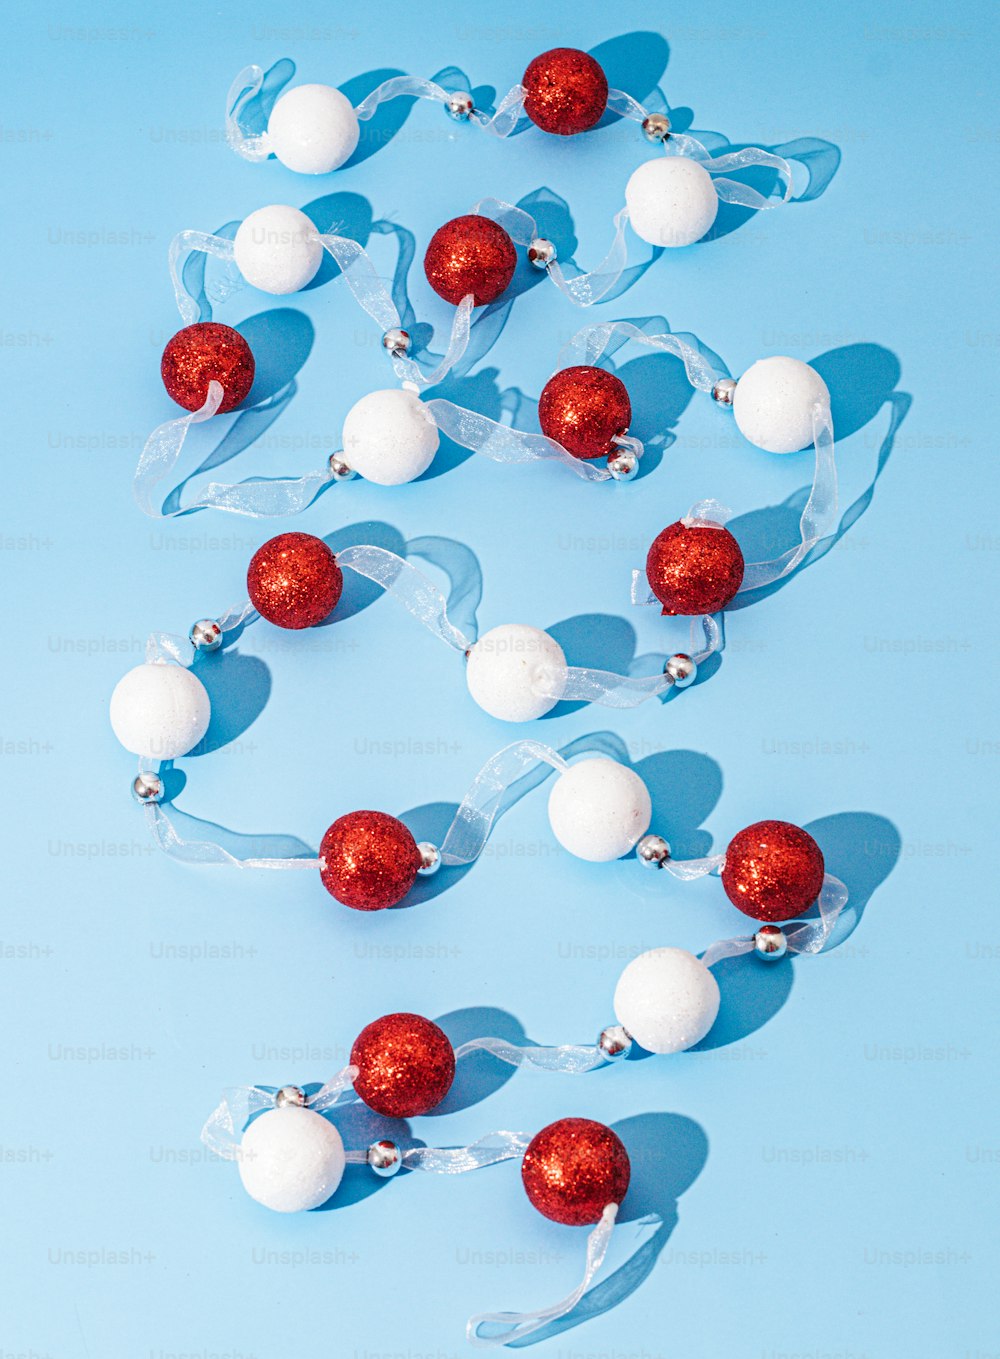 a group of red and white ornaments on a blue background